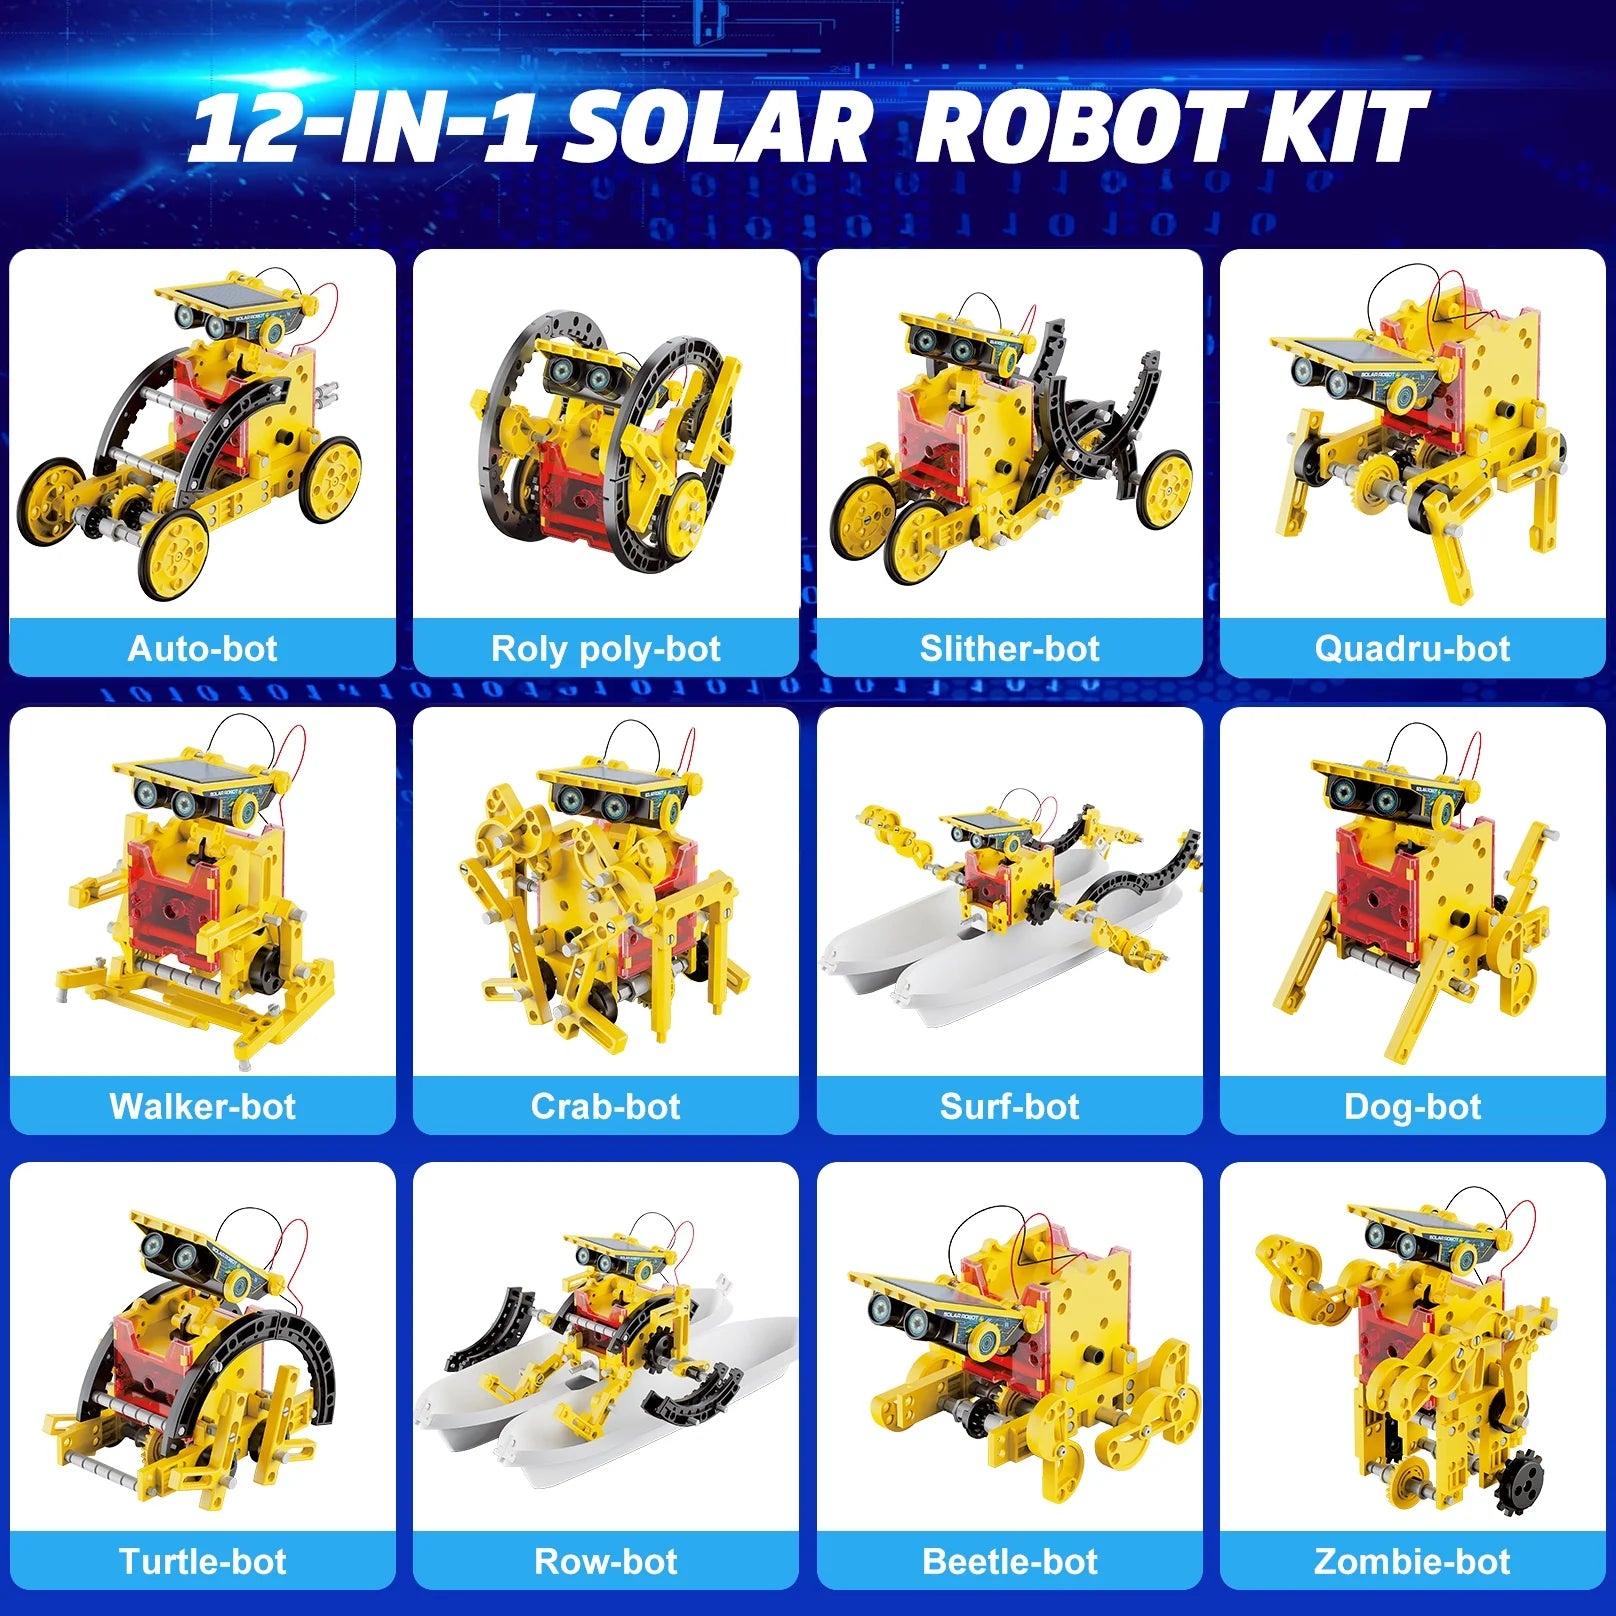 12-In-1 Solar Robot Kit for Kids, STEM Educational Science Experiment Kit Toys for Kids Aged 8 9 10 11 12+ Years Old, Gift for Boys Girls Ages 8 -12 Years.(Yellow)